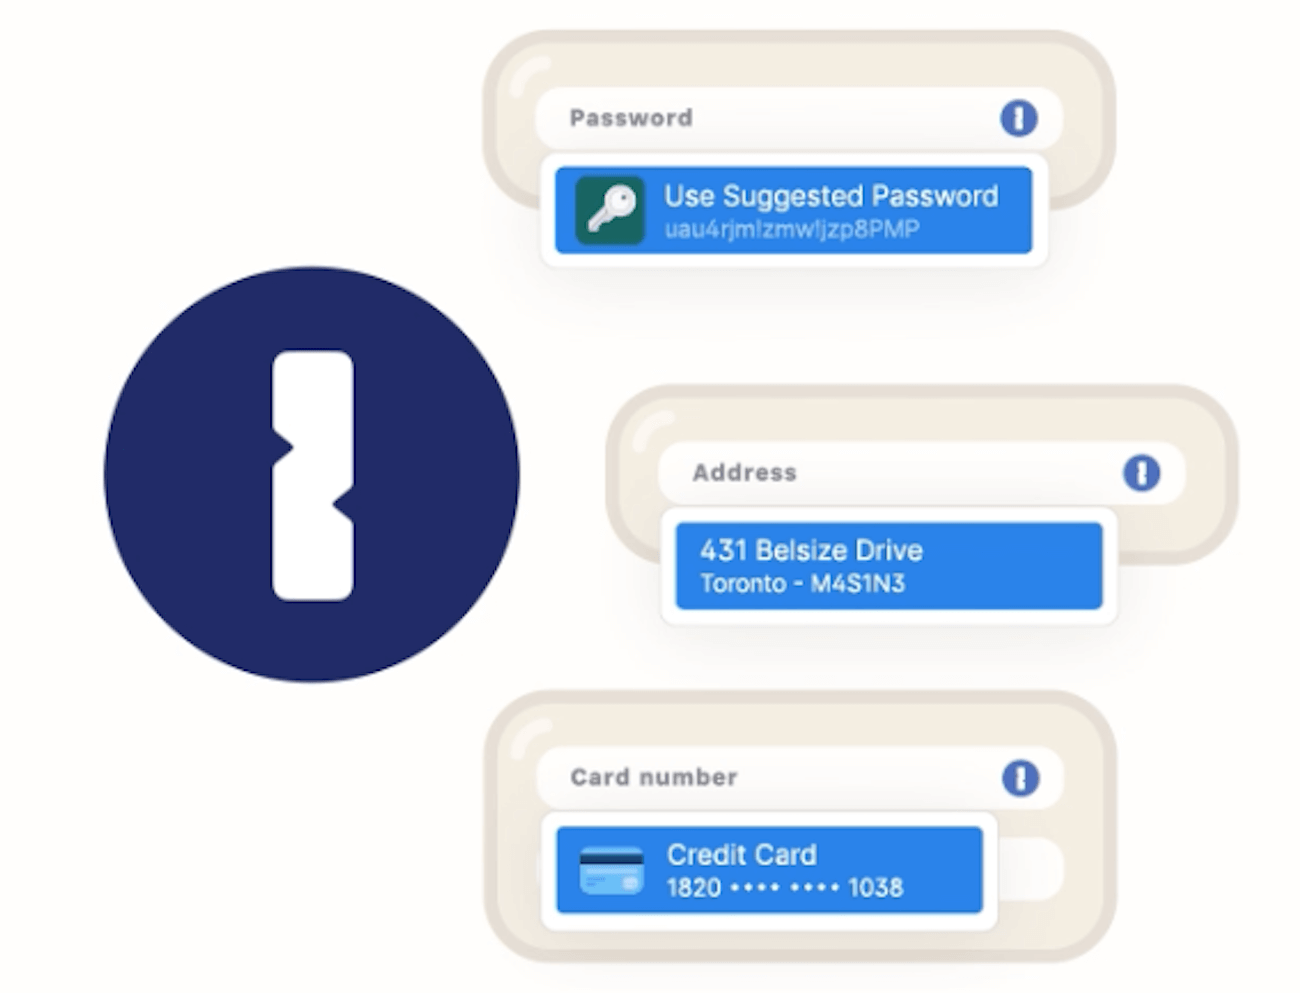 The 1Password logo surrounding by a suggested password, a saved address, and a saved credit card number.